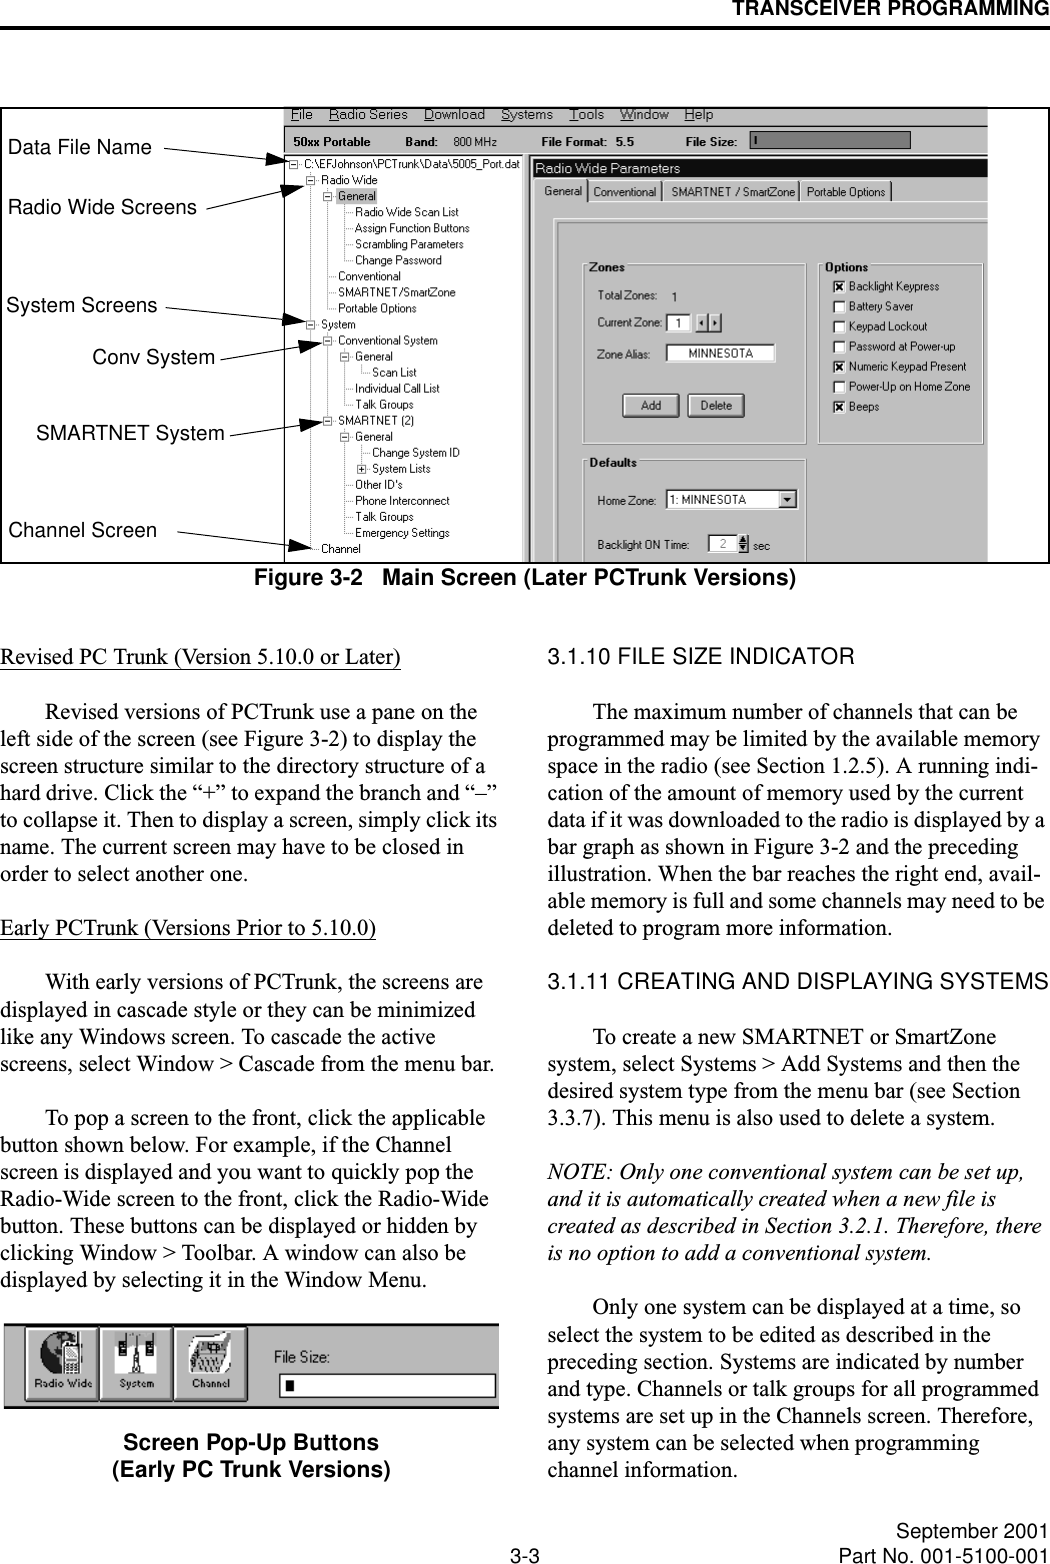 TRANSCEIVER PROGRAMMING3-3 September 2001Part No. 001-5100-001Figure 3-2   Main Screen (Later PCTrunk Versions)Data File NameRadio Wide ScreensSystem ScreensChannel ScreenConv SystemSMARTNET SystemRevised PC Trunk (Version 5.10.0 or Later)Revised versions of PCTrunk use a pane on the left side of the screen (see Figure 3-2) to display the screen structure similar to the directory structure of a hard drive. Click the “+” to expand the branch and “–” to collapse it. Then to display a screen, simply click its name. The current screen may have to be closed in order to select another one.Early PCTrunk (Versions Prior to 5.10.0)With early versions of PCTrunk, the screens are displayed in cascade style or they can be minimized like any Windows screen. To cascade the active screens, select Window &gt; Cascade from the menu bar. To pop a screen to the front, click the applicable button shown below. For example, if the Channel screen is displayed and you want to quickly pop the Radio-Wide screen to the front, click the Radio-Wide button. These buttons can be displayed or hidden by clicking Window &gt; Toolbar. A window can also be displayed by selecting it in the Window Menu. Screen Pop-Up Buttons(Early PC Trunk Versions)3.1.10 FILE SIZE INDICATORThe maximum number of channels that can be programmed may be limited by the available memory space in the radio (see Section 1.2.5). A running indi-cation of the amount of memory used by the current data if it was downloaded to the radio is displayed by a bar graph as shown in Figure 3-2 and the preceding illustration. When the bar reaches the right end, avail-able memory is full and some channels may need to be deleted to program more information.3.1.11 CREATING AND DISPLAYING SYSTEMSTo create a new SMARTNET or SmartZone system, select Systems &gt; Add Systems and then the desired system type from the menu bar (see Section 3.3.7). This menu is also used to delete a system.NOTE: Only one conventional system can be set up, and it is automatically created when a new file is created as described in Section 3.2.1. Therefore, there is no option to add a conventional system.Only one system can be displayed at a time, so select the system to be edited as described in the preceding section. Systems are indicated by number and type. Channels or talk groups for all programmed systems are set up in the Channels screen. Therefore, any system can be selected when programming channel information. 